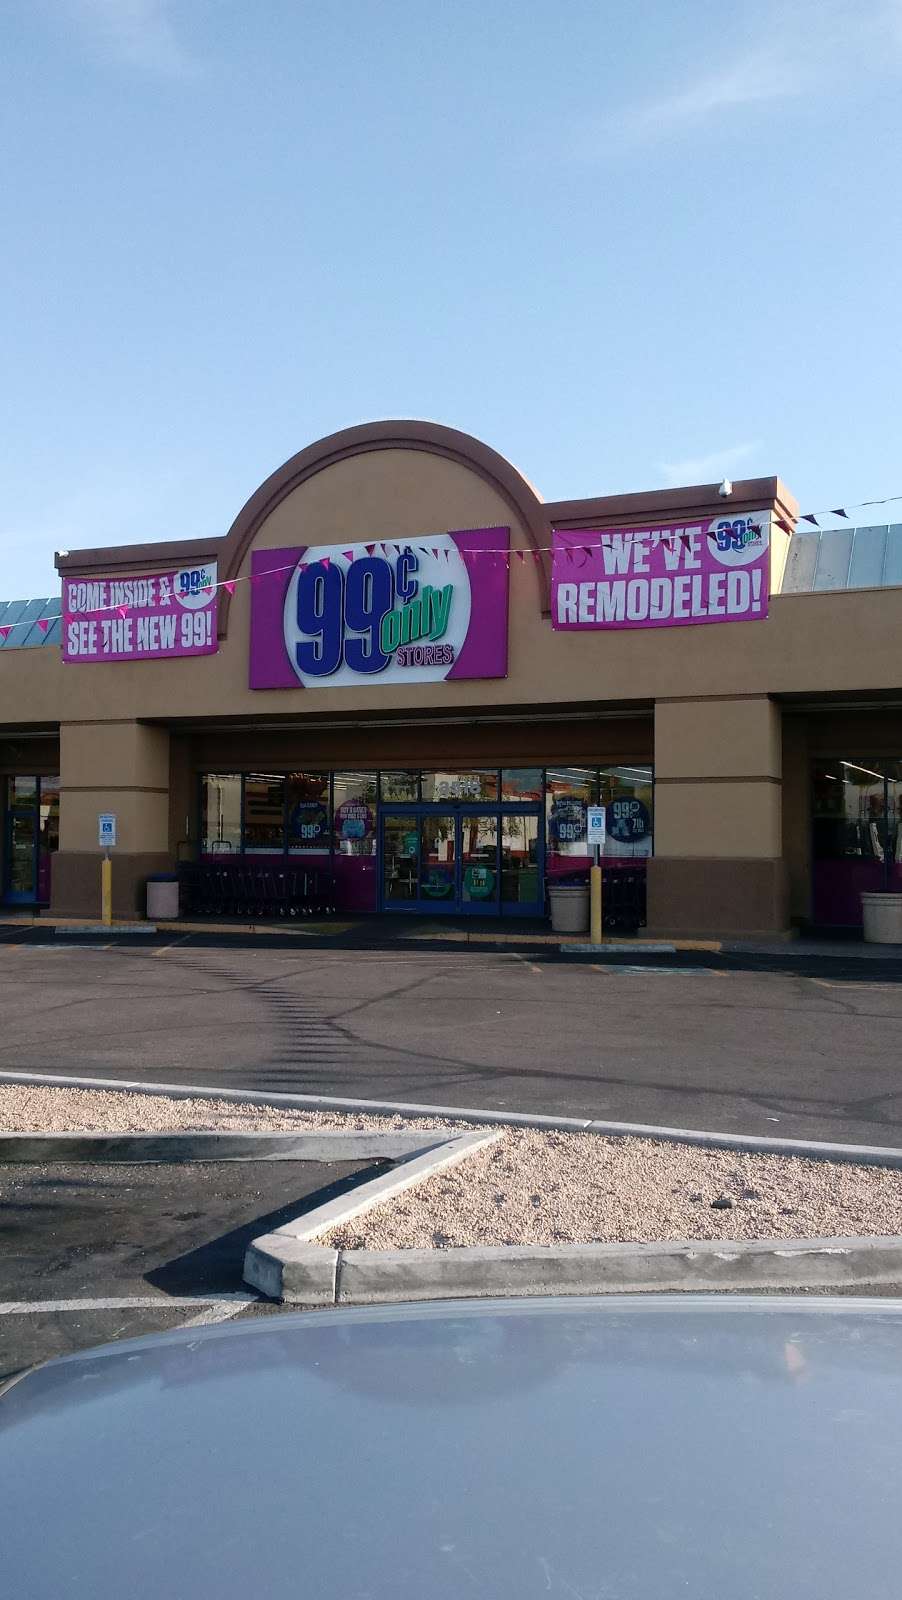 99 Cents Only Stores | 3518 W Peoria Ave, Phoenix, AZ 85029, USA | Phone: (602) 863-9929